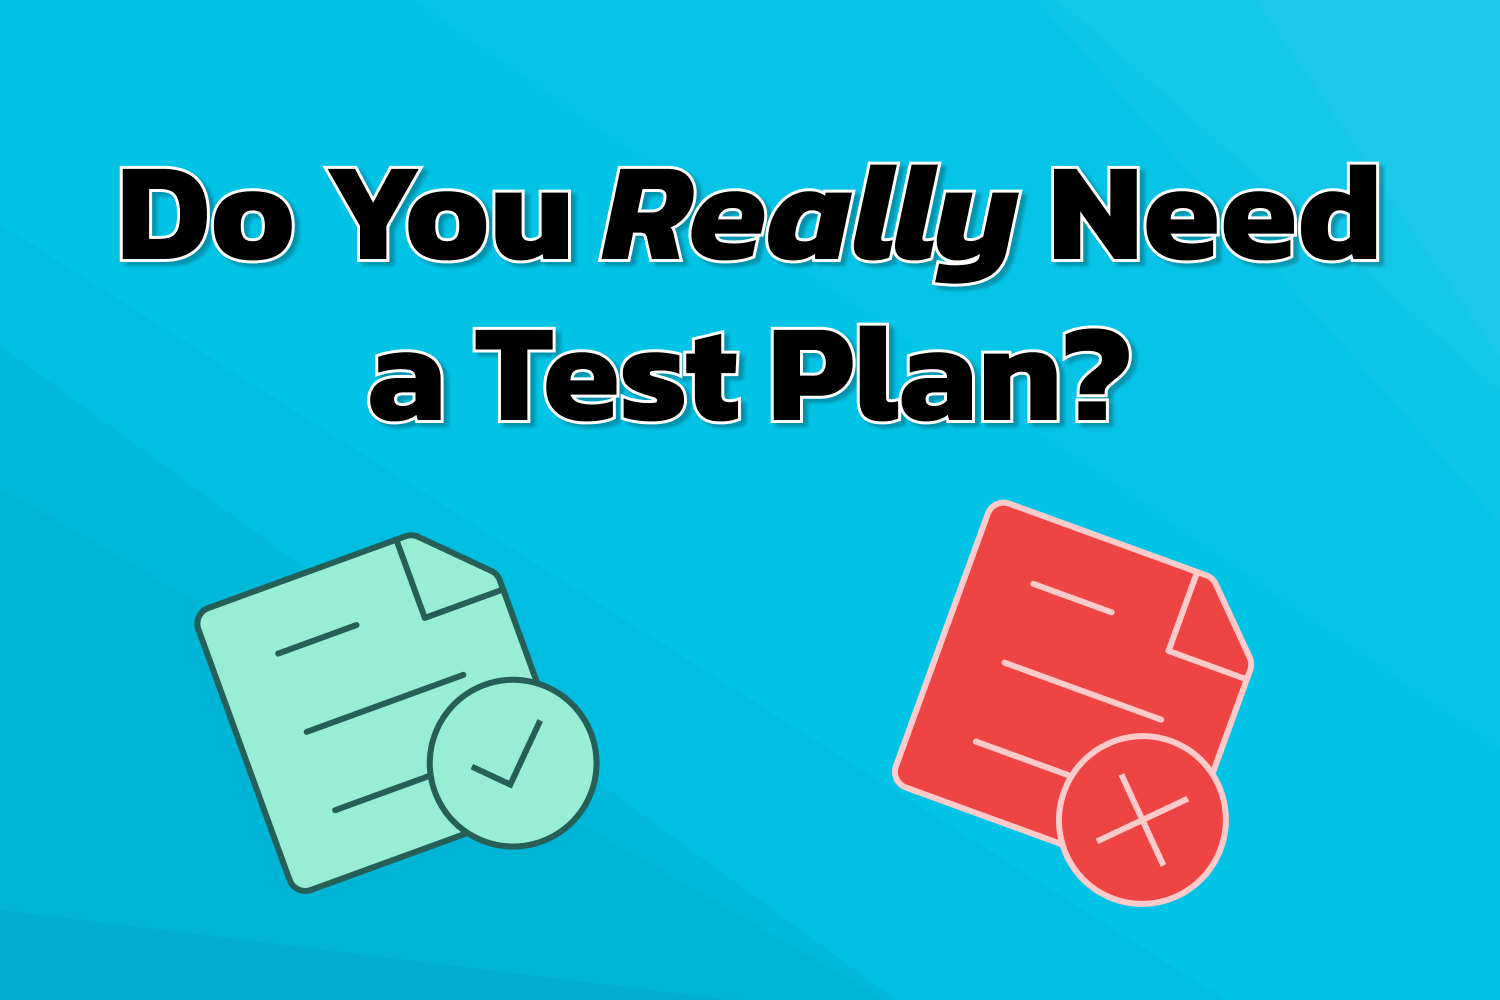 Do You Really Need a Test Plan?